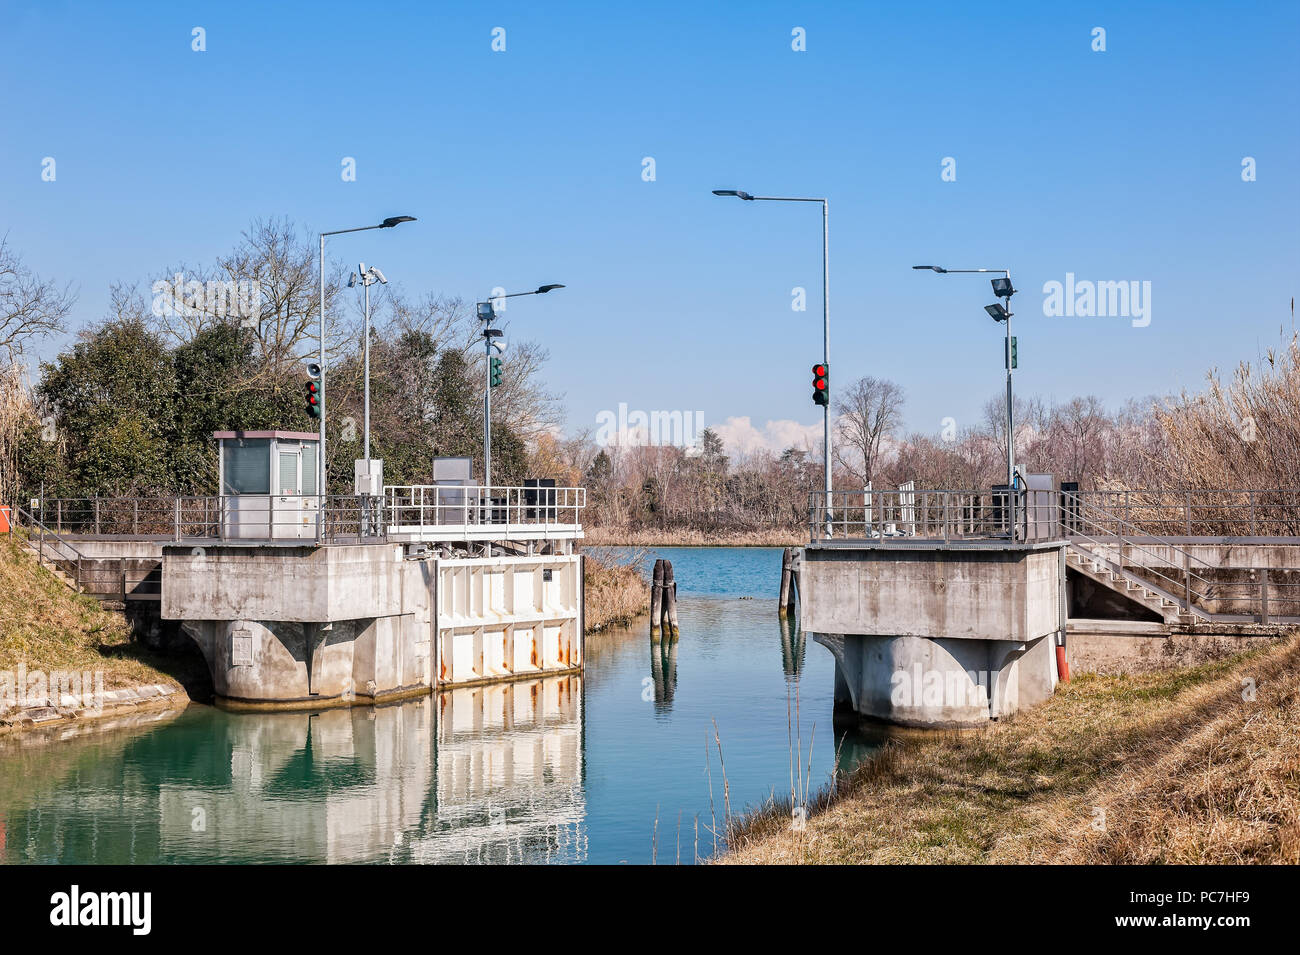 Canal lock and traffic light for regulation of boat traffic. Stock Photo